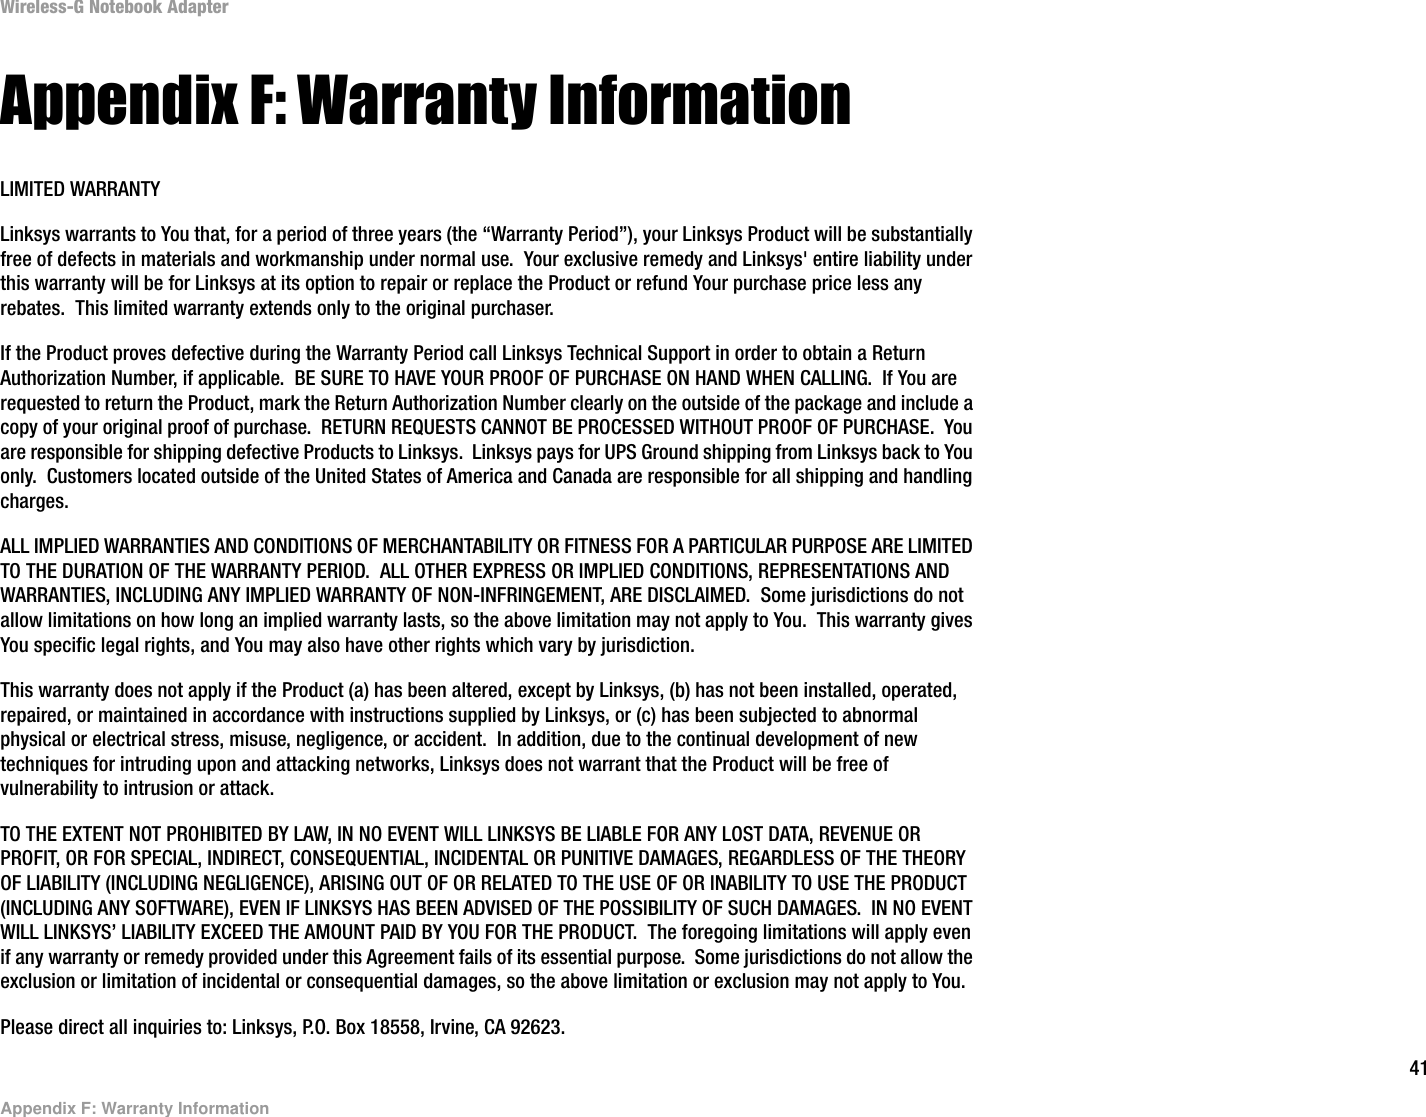 41Appendix F: Warranty InformationWireless-G Notebook AdapterAppendix F: Warranty InformationLIMITED WARRANTYLinksys warrants to You that, for a period of three years (the “Warranty Period”), your Linksys Product will be substantially free of defects in materials and workmanship under normal use.  Your exclusive remedy and Linksys&apos; entire liability under this warranty will be for Linksys at its option to repair or replace the Product or refund Your purchase price less any rebates.  This limited warranty extends only to the original purchaser.  If the Product proves defective during the Warranty Period call Linksys Technical Support in order to obtain a Return Authorization Number, if applicable.  BE SURE TO HAVE YOUR PROOF OF PURCHASE ON HAND WHEN CALLING.  If You are requested to return the Product, mark the Return Authorization Number clearly on the outside of the package and include a copy of your original proof of purchase.  RETURN REQUESTS CANNOT BE PROCESSED WITHOUT PROOF OF PURCHASE.  You are responsible for shipping defective Products to Linksys.  Linksys pays for UPS Ground shipping from Linksys back to You only.  Customers located outside of the United States of America and Canada are responsible for all shipping and handling charges. ALL IMPLIED WARRANTIES AND CONDITIONS OF MERCHANTABILITY OR FITNESS FOR A PARTICULAR PURPOSE ARE LIMITED TO THE DURATION OF THE WARRANTY PERIOD.  ALL OTHER EXPRESS OR IMPLIED CONDITIONS, REPRESENTATIONS AND WARRANTIES, INCLUDING ANY IMPLIED WARRANTY OF NON-INFRINGEMENT, ARE DISCLAIMED.  Some jurisdictions do not allow limitations on how long an implied warranty lasts, so the above limitation may not apply to You.  This warranty gives You specific legal rights, and You may also have other rights which vary by jurisdiction.This warranty does not apply if the Product (a) has been altered, except by Linksys, (b) has not been installed, operated, repaired, or maintained in accordance with instructions supplied by Linksys, or (c) has been subjected to abnormal physical or electrical stress, misuse, negligence, or accident.  In addition, due to the continual development of new techniques for intruding upon and attacking networks, Linksys does not warrant that the Product will be free of vulnerability to intrusion or attack.TO THE EXTENT NOT PROHIBITED BY LAW, IN NO EVENT WILL LINKSYS BE LIABLE FOR ANY LOST DATA, REVENUE OR PROFIT, OR FOR SPECIAL, INDIRECT, CONSEQUENTIAL, INCIDENTAL OR PUNITIVE DAMAGES, REGARDLESS OF THE THEORY OF LIABILITY (INCLUDING NEGLIGENCE), ARISING OUT OF OR RELATED TO THE USE OF OR INABILITY TO USE THE PRODUCT (INCLUDING ANY SOFTWARE), EVEN IF LINKSYS HAS BEEN ADVISED OF THE POSSIBILITY OF SUCH DAMAGES.  IN NO EVENT WILL LINKSYS’ LIABILITY EXCEED THE AMOUNT PAID BY YOU FOR THE PRODUCT.  The foregoing limitations will apply even if any warranty or remedy provided under this Agreement fails of its essential purpose.  Some jurisdictions do not allow the exclusion or limitation of incidental or consequential damages, so the above limitation or exclusion may not apply to You.Please direct all inquiries to: Linksys, P.O. Box 18558, Irvine, CA 92623.